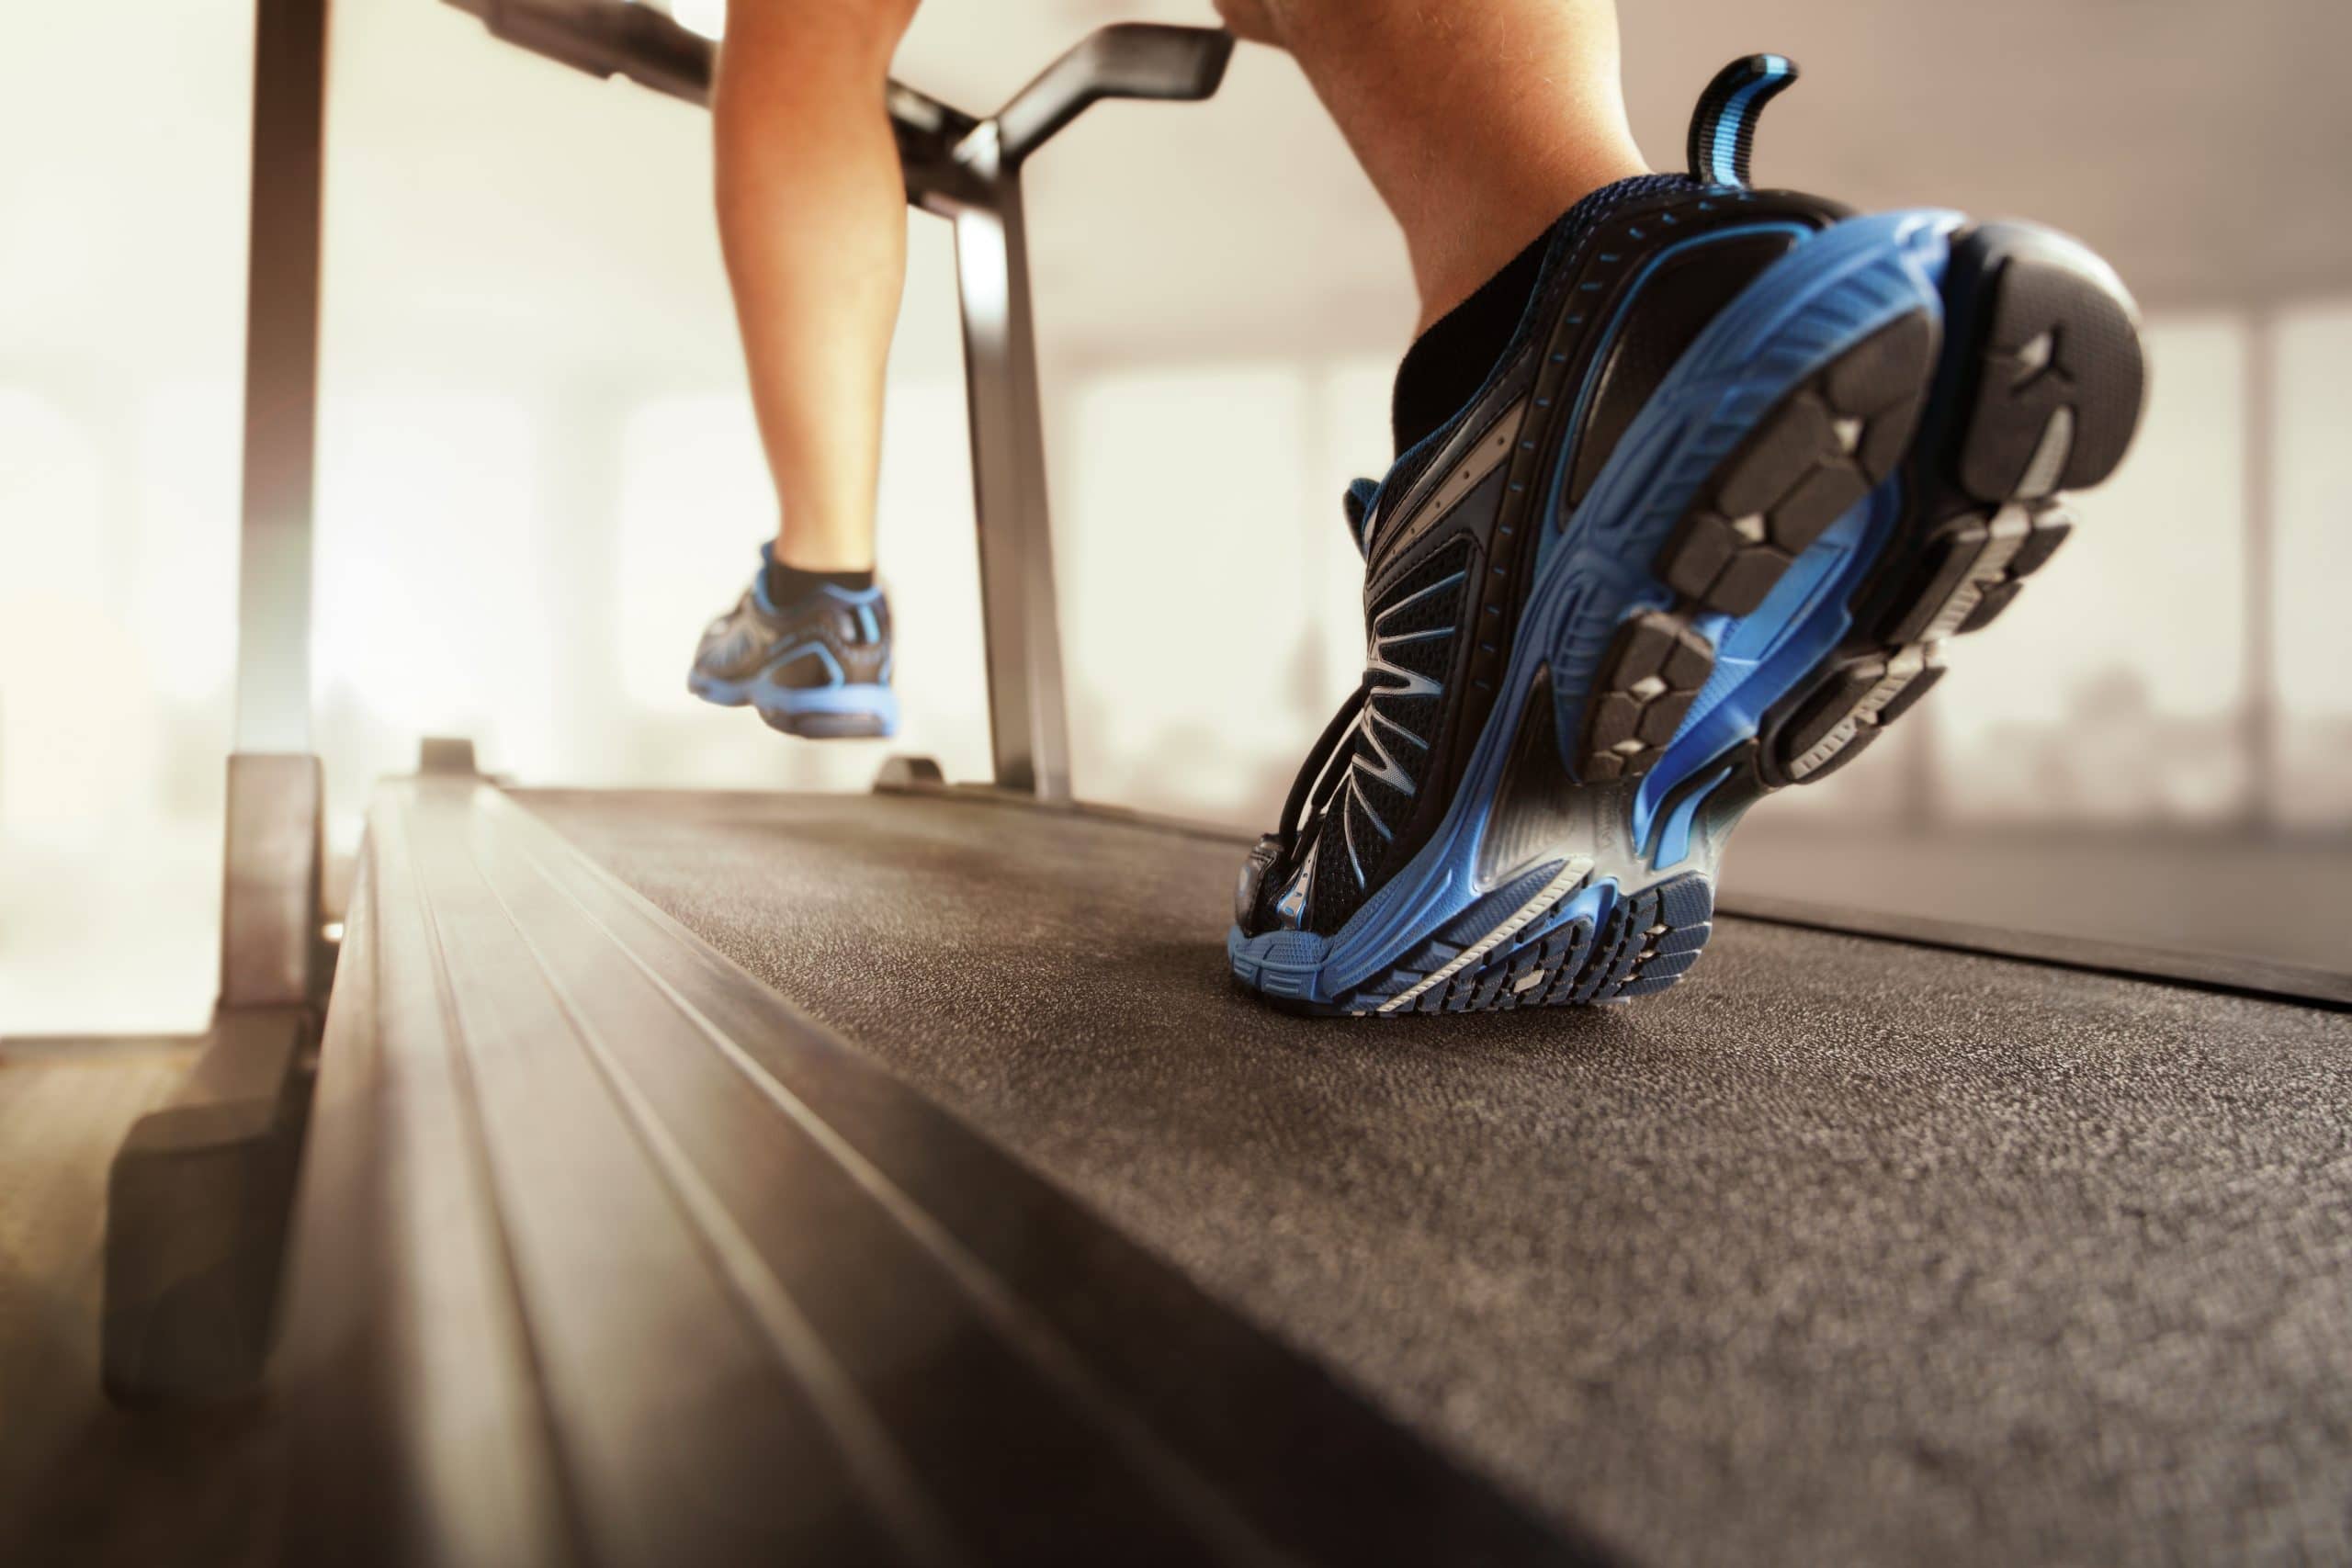 Landice Treadmills: Staying Active During Remote Times